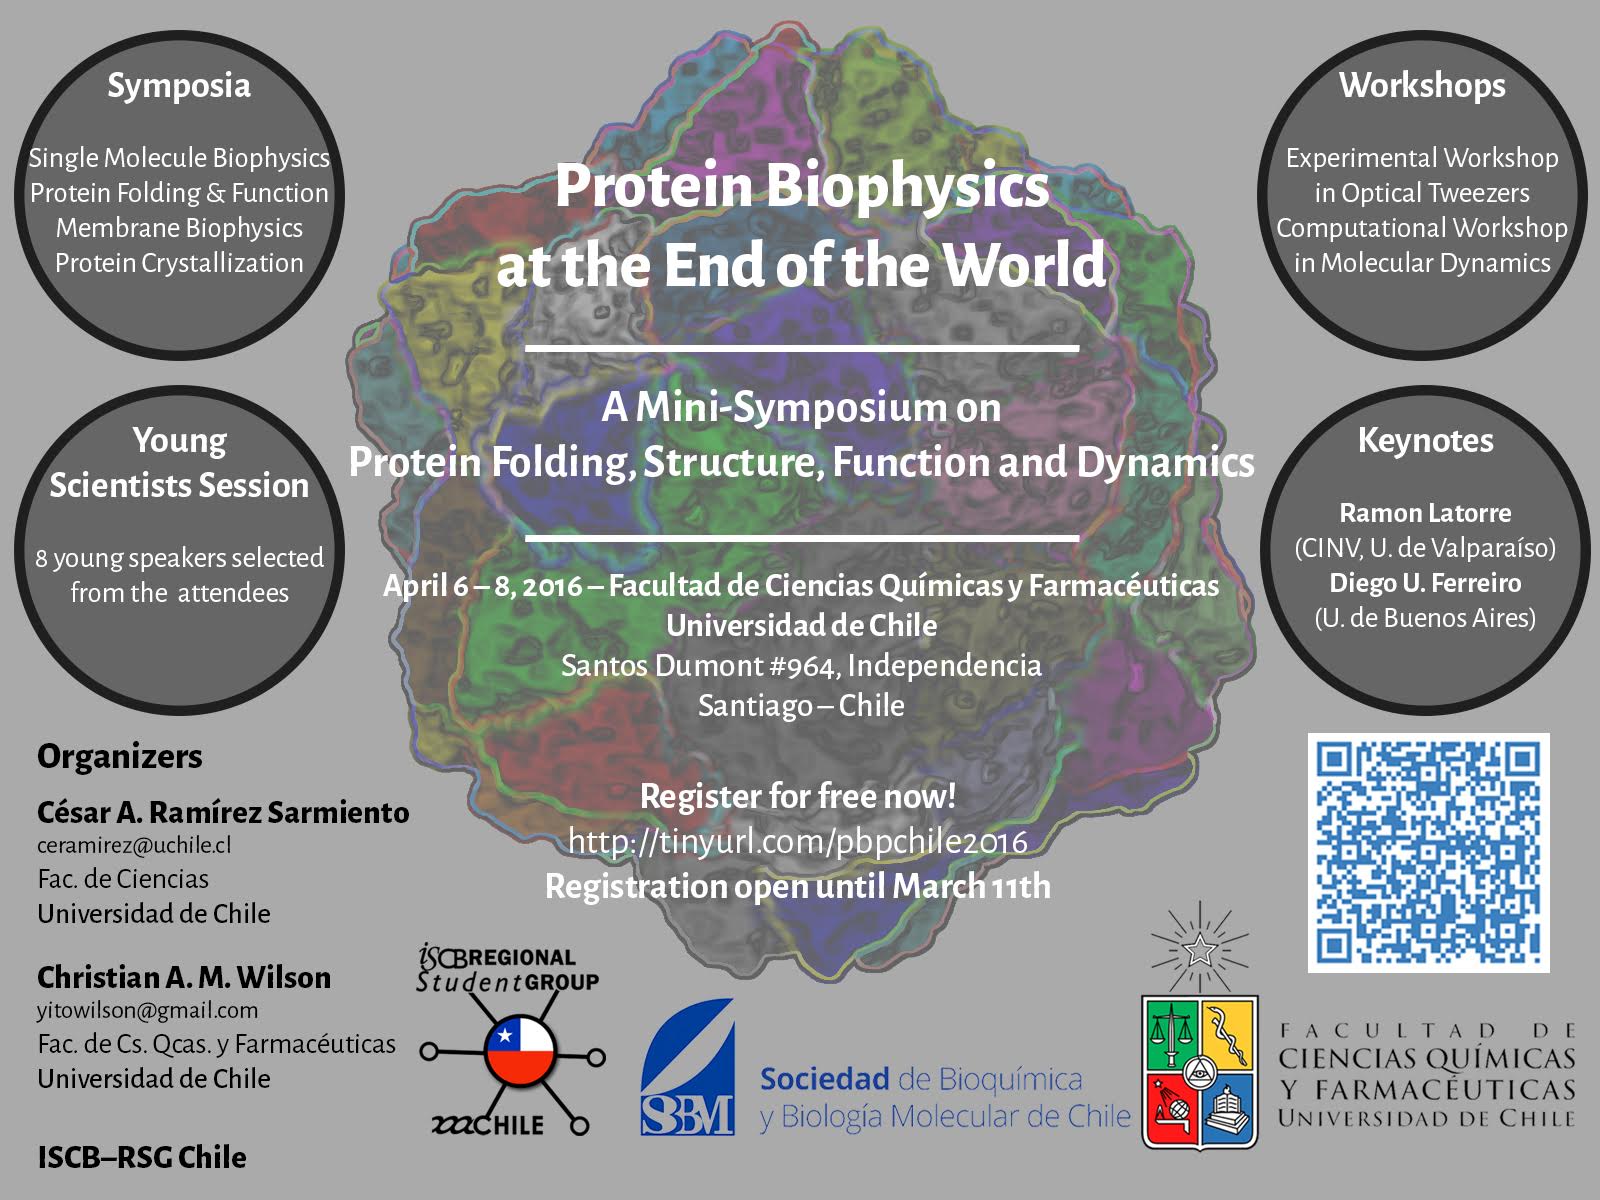 Simposio Protein Biophysics at the End of the World Redbionova